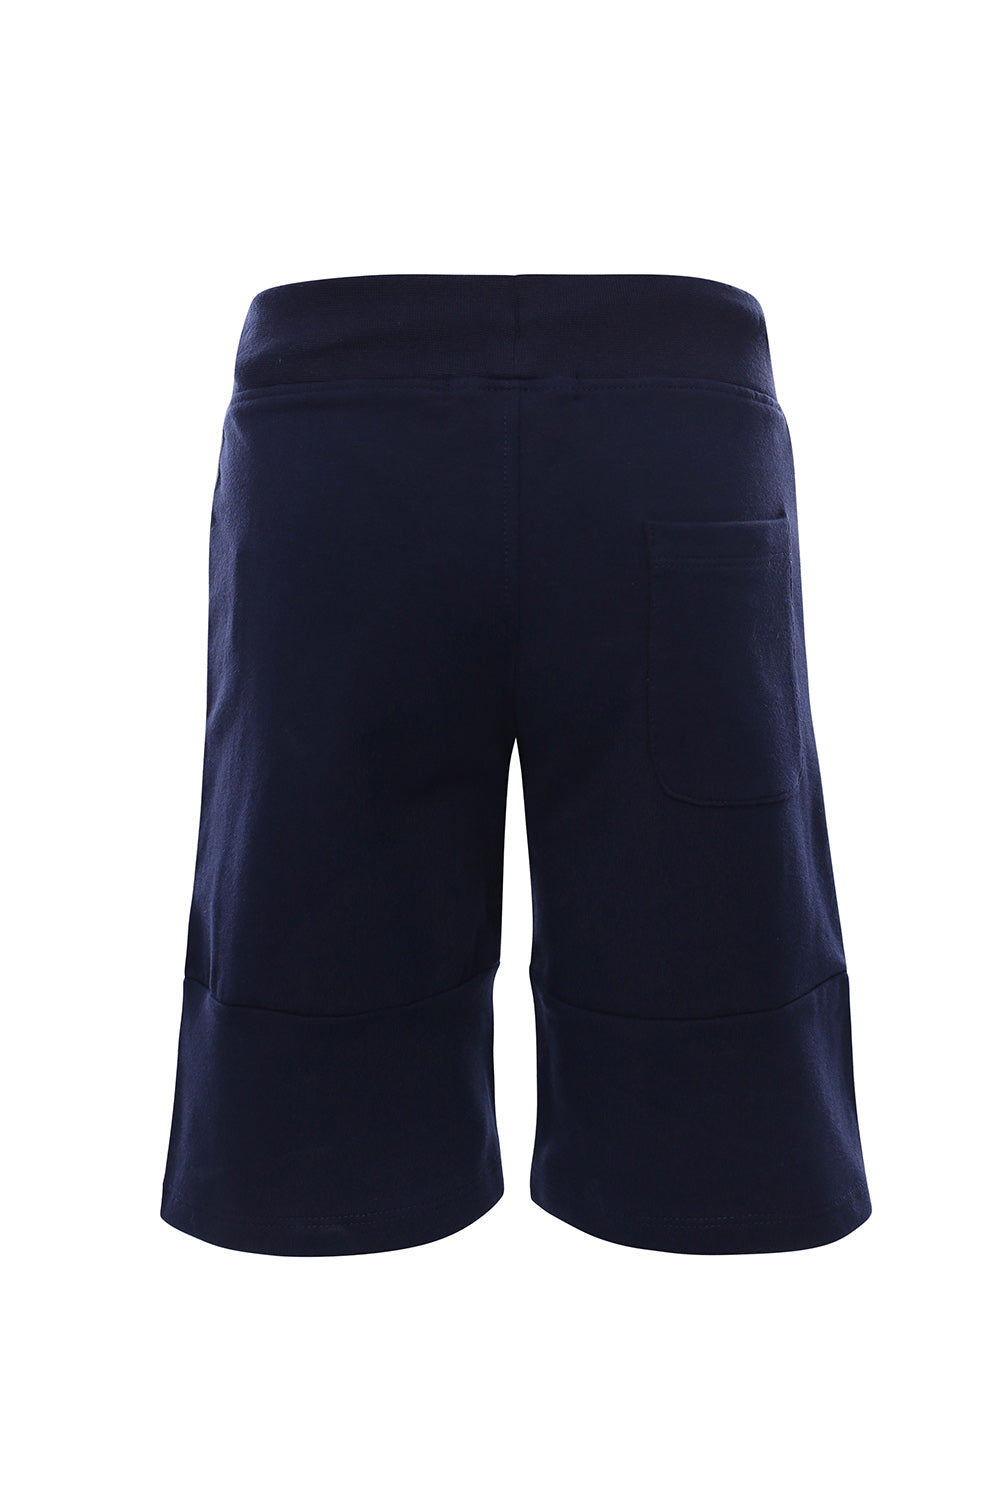 Common Heroes Sweat Shorts